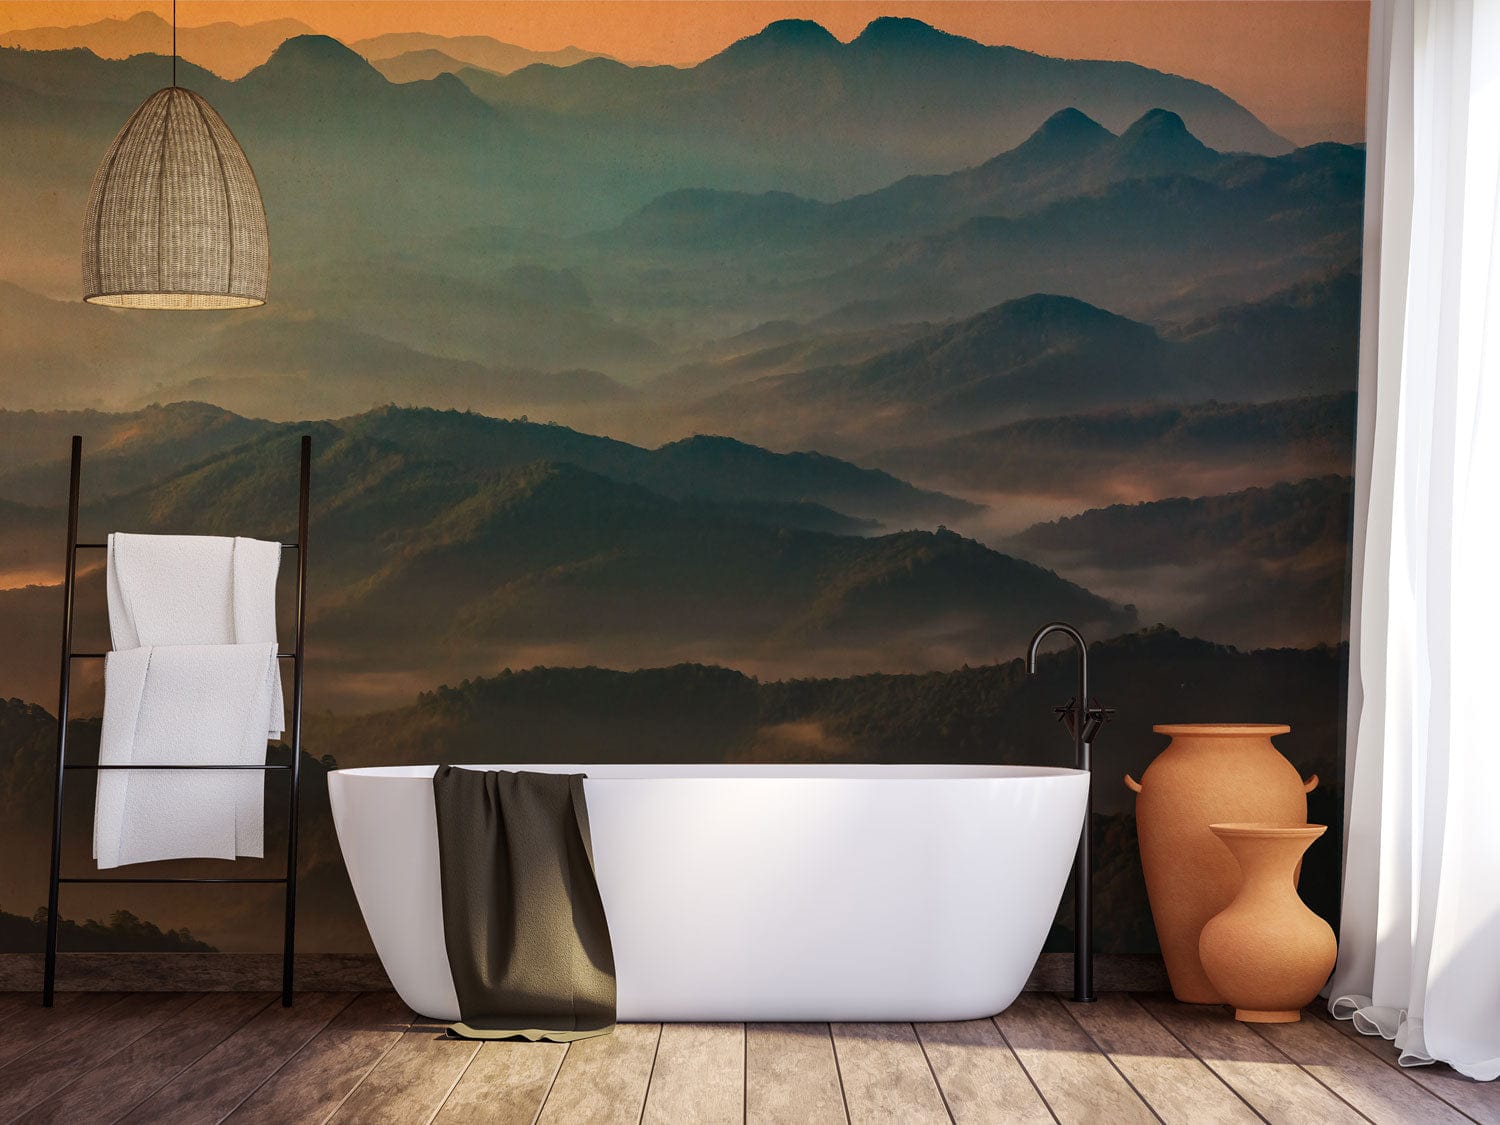 Wallpaper Mural for Bathroom Decoration Featuring Mountains Looking Out Over the Landscape